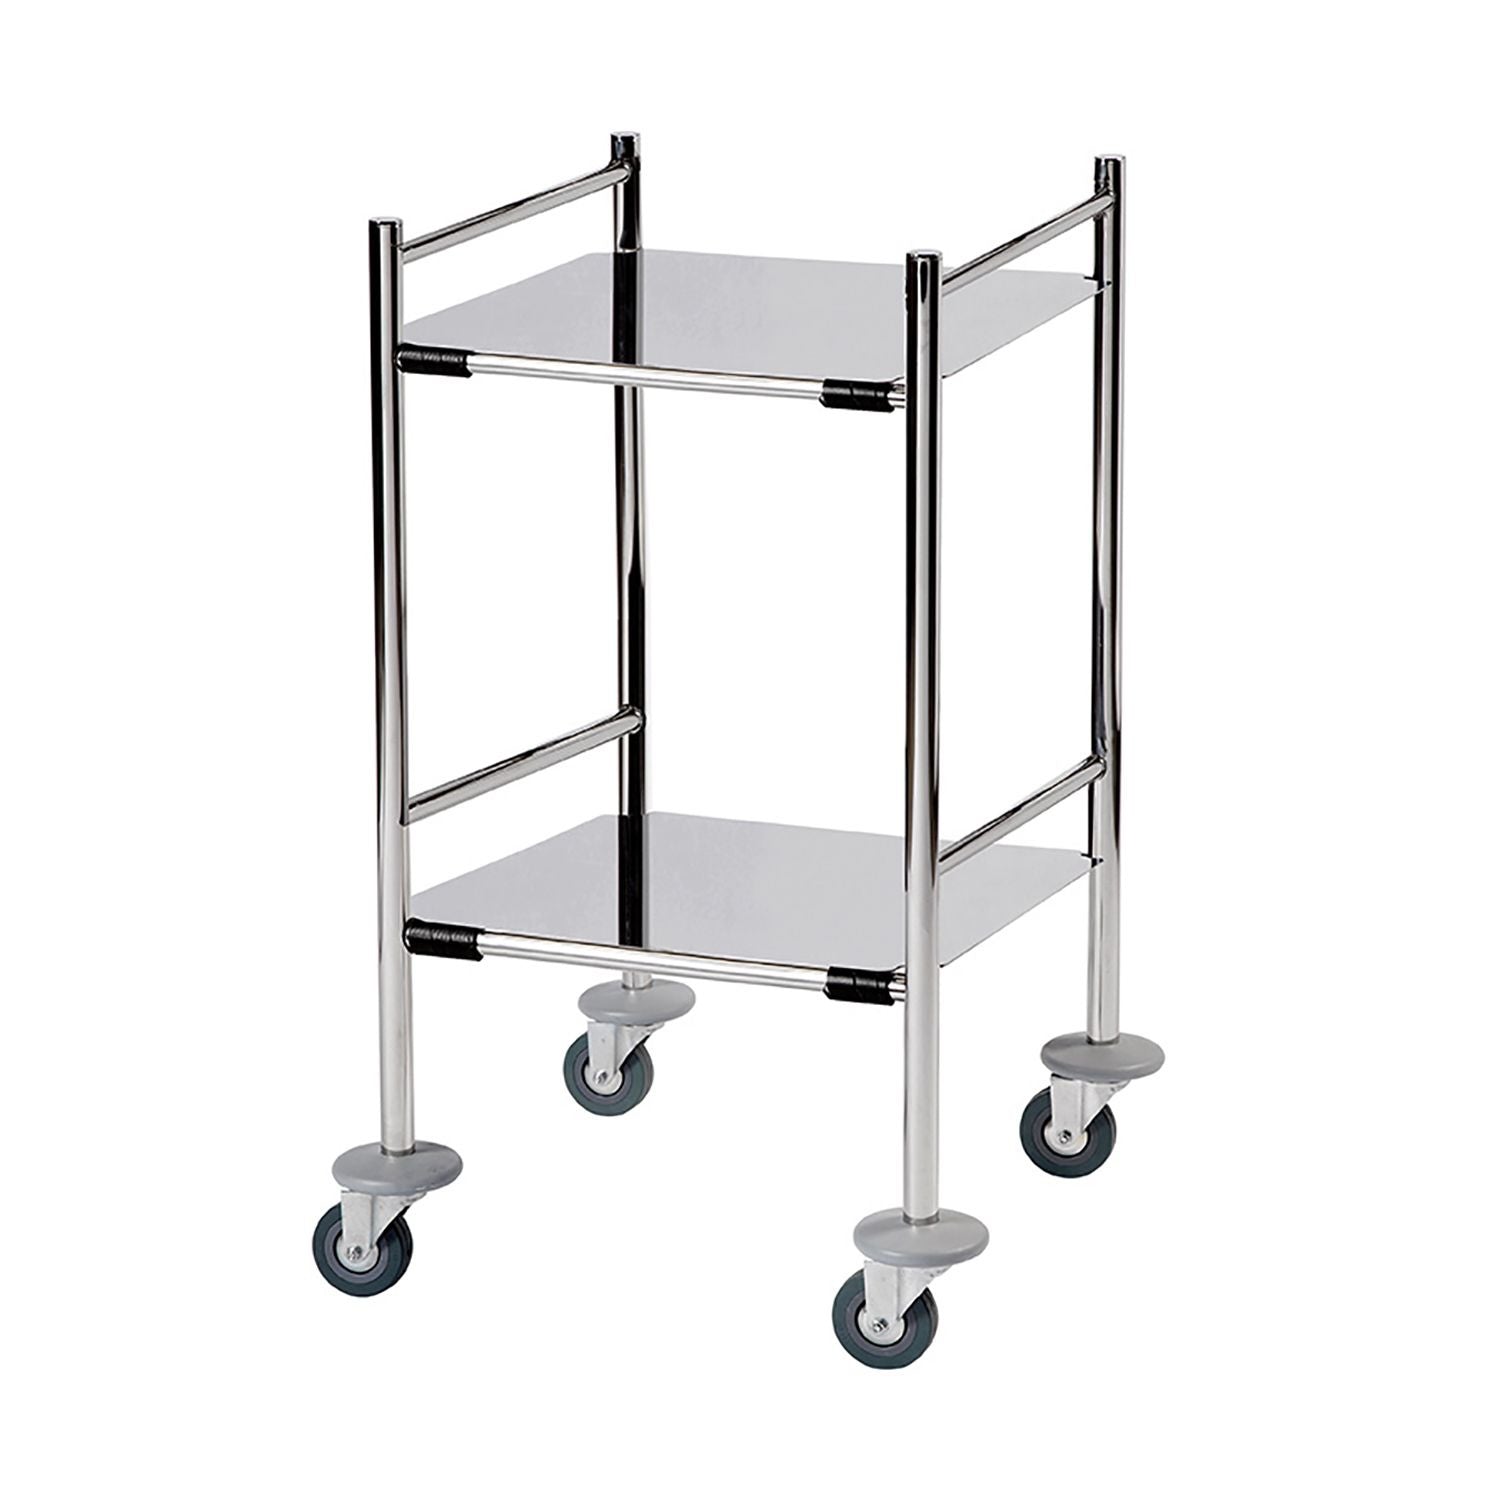 Large 75cm Wide Mirror Polished Stainless Steel Surgical Trolley - 2 Fully Welded Fixed Shelves (Flange Down)